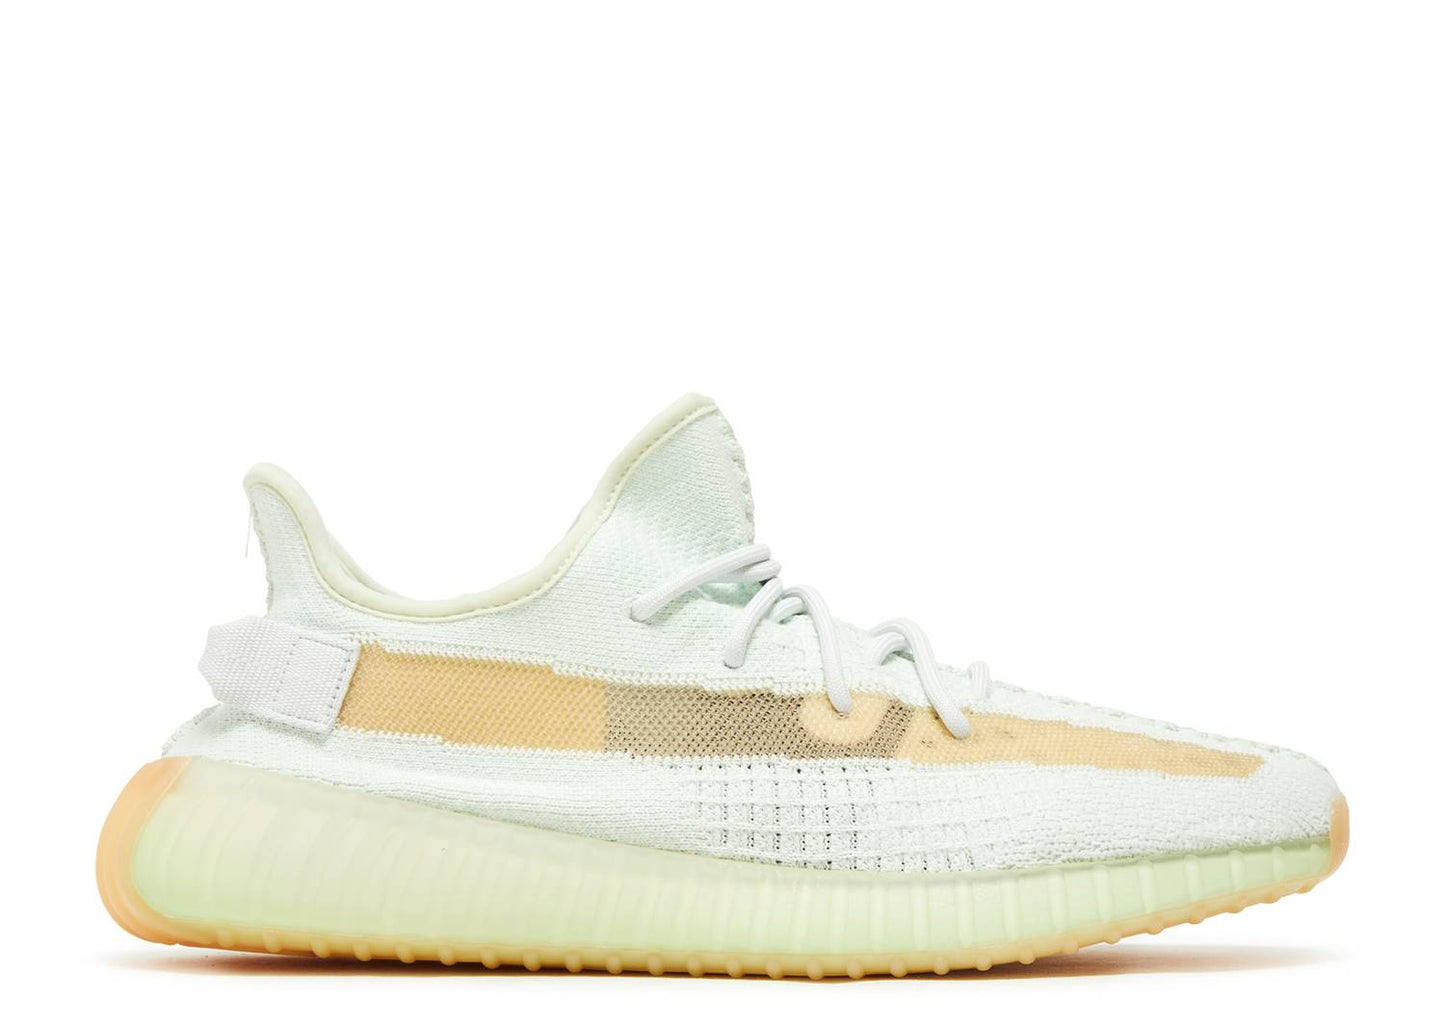 Yeezy 350 V2 "Hyperspace"